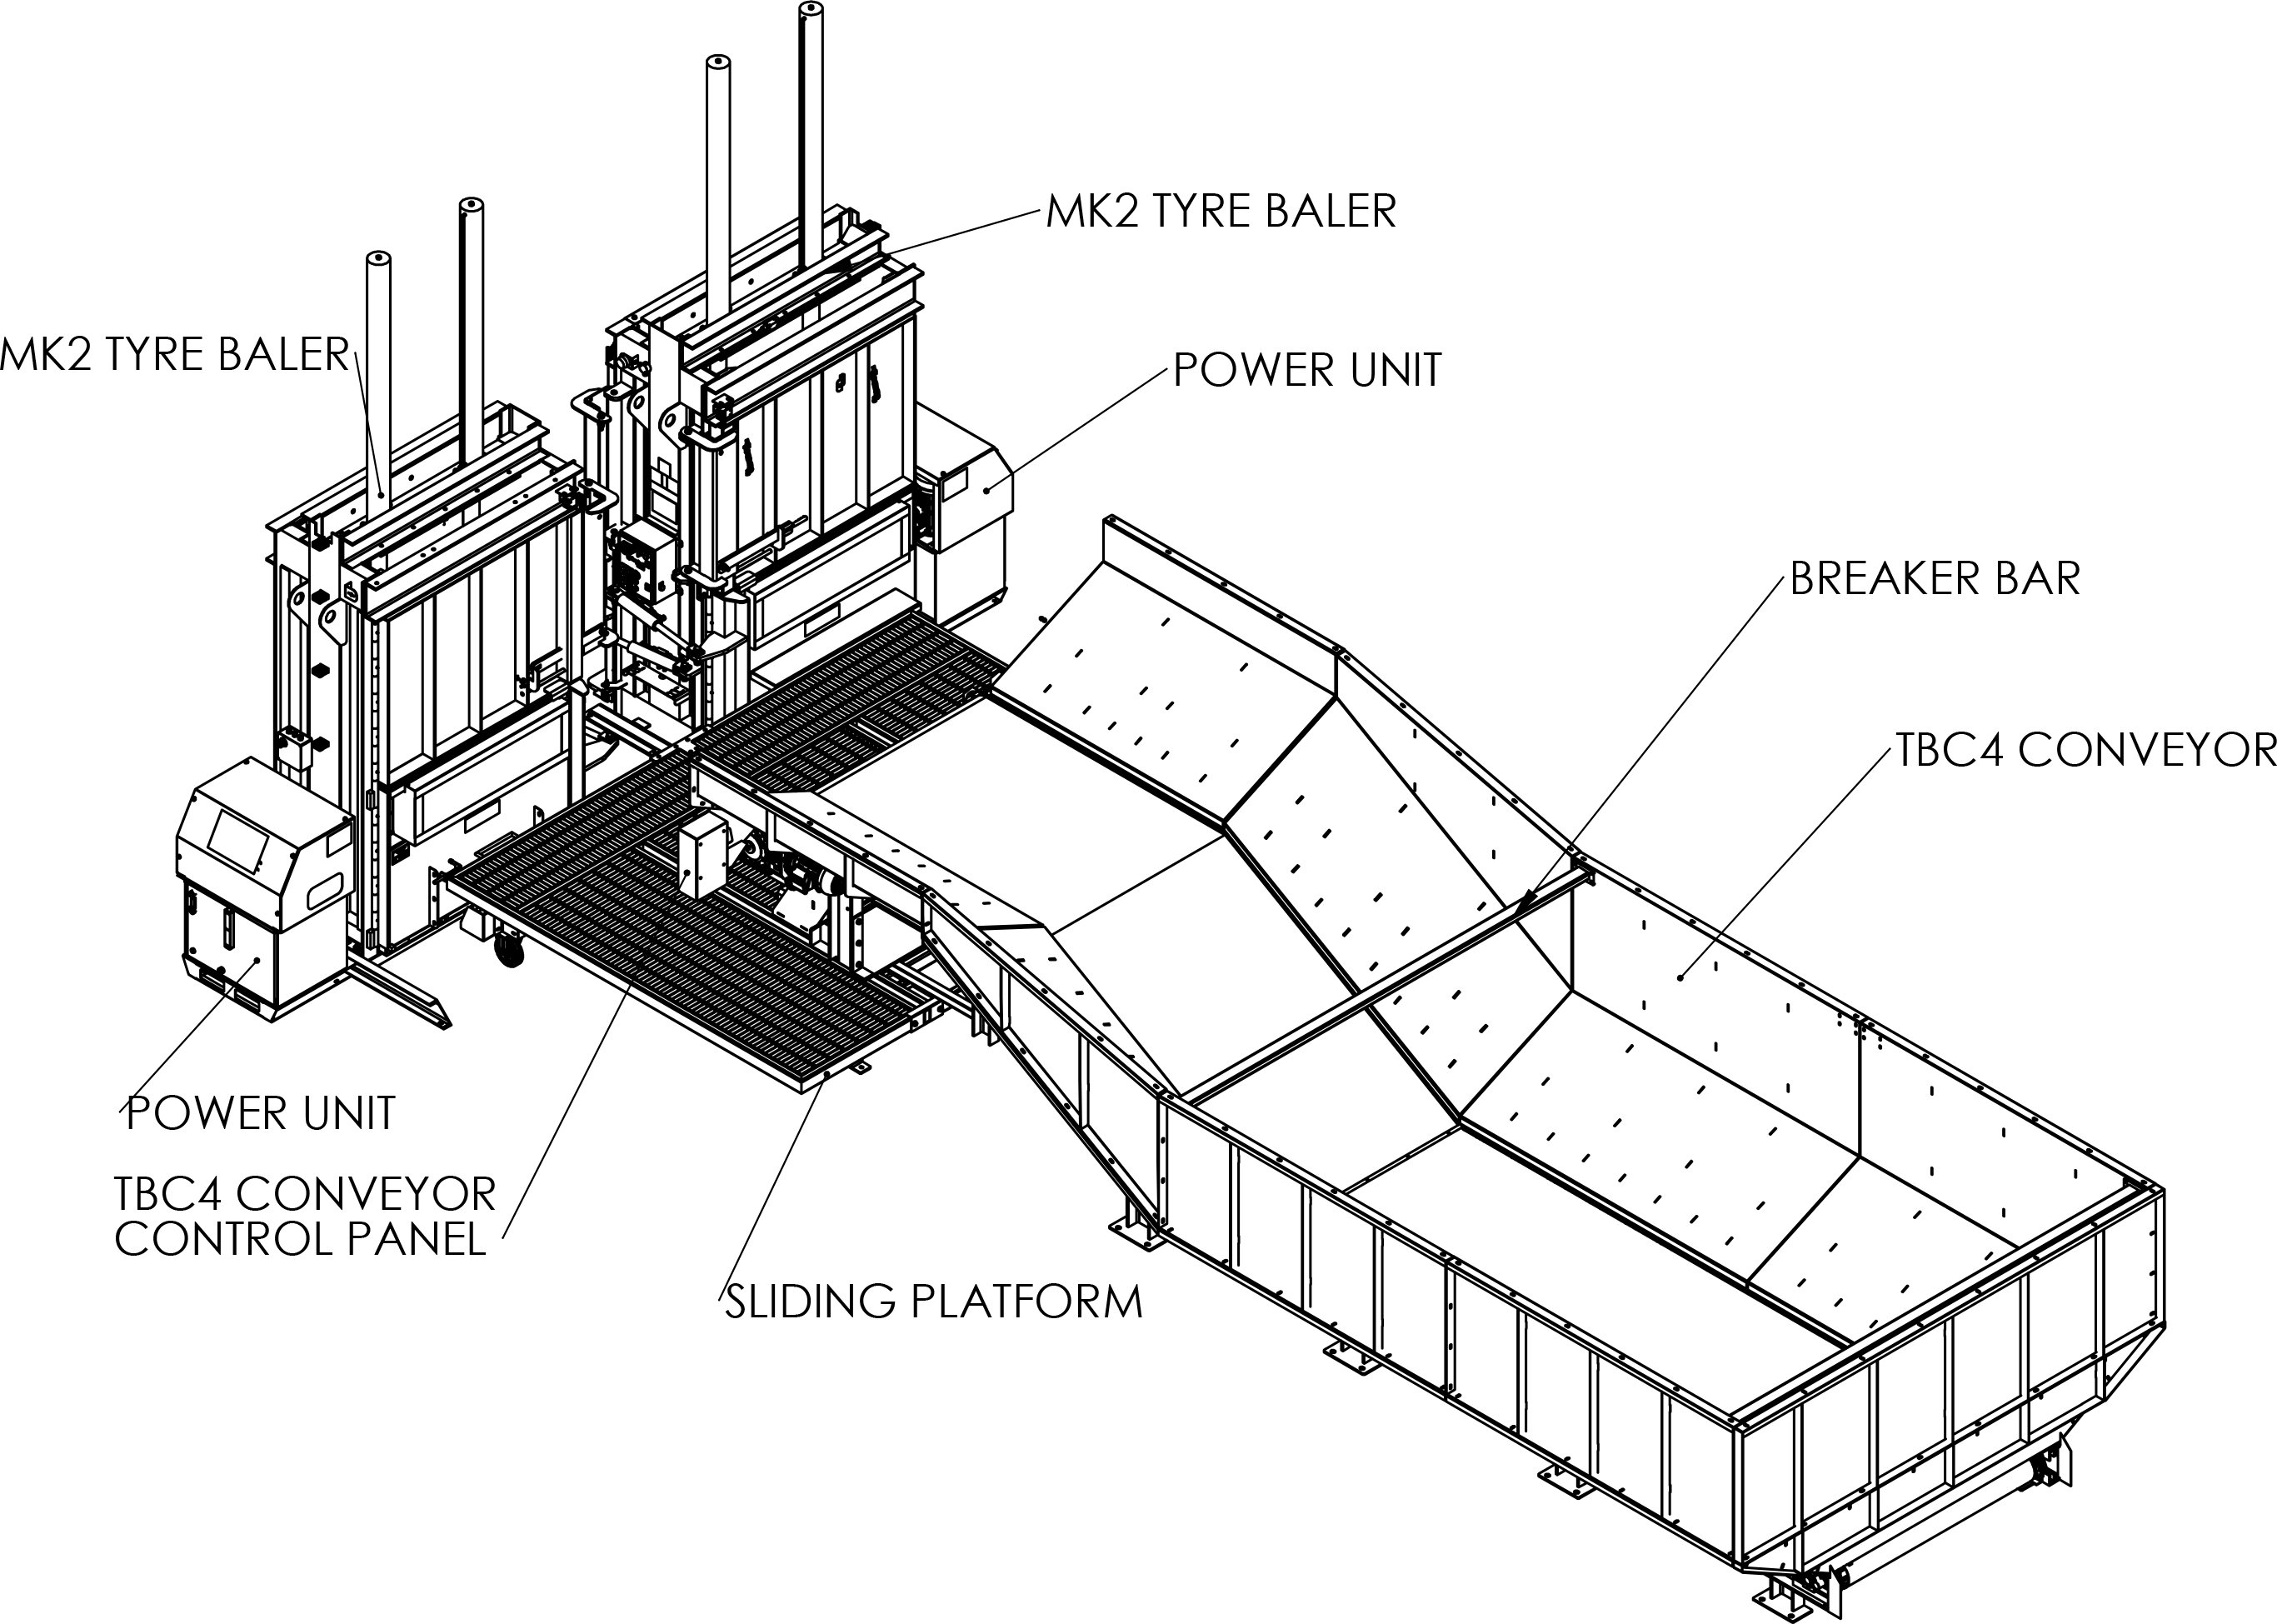 Isometric Overview of Gradeall Inclined Conveyor and MK2 Balers